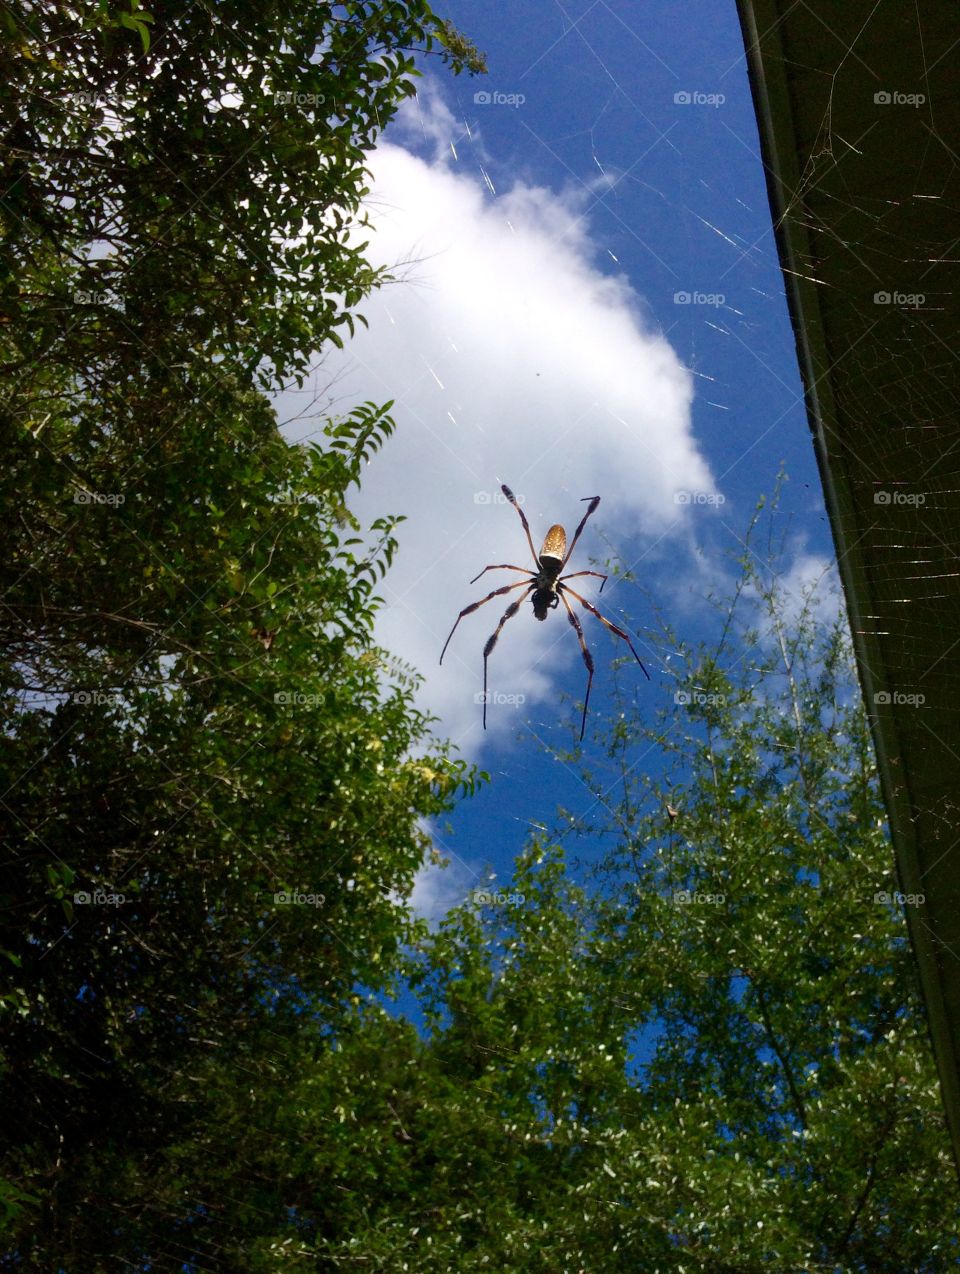 Spider in the sky 